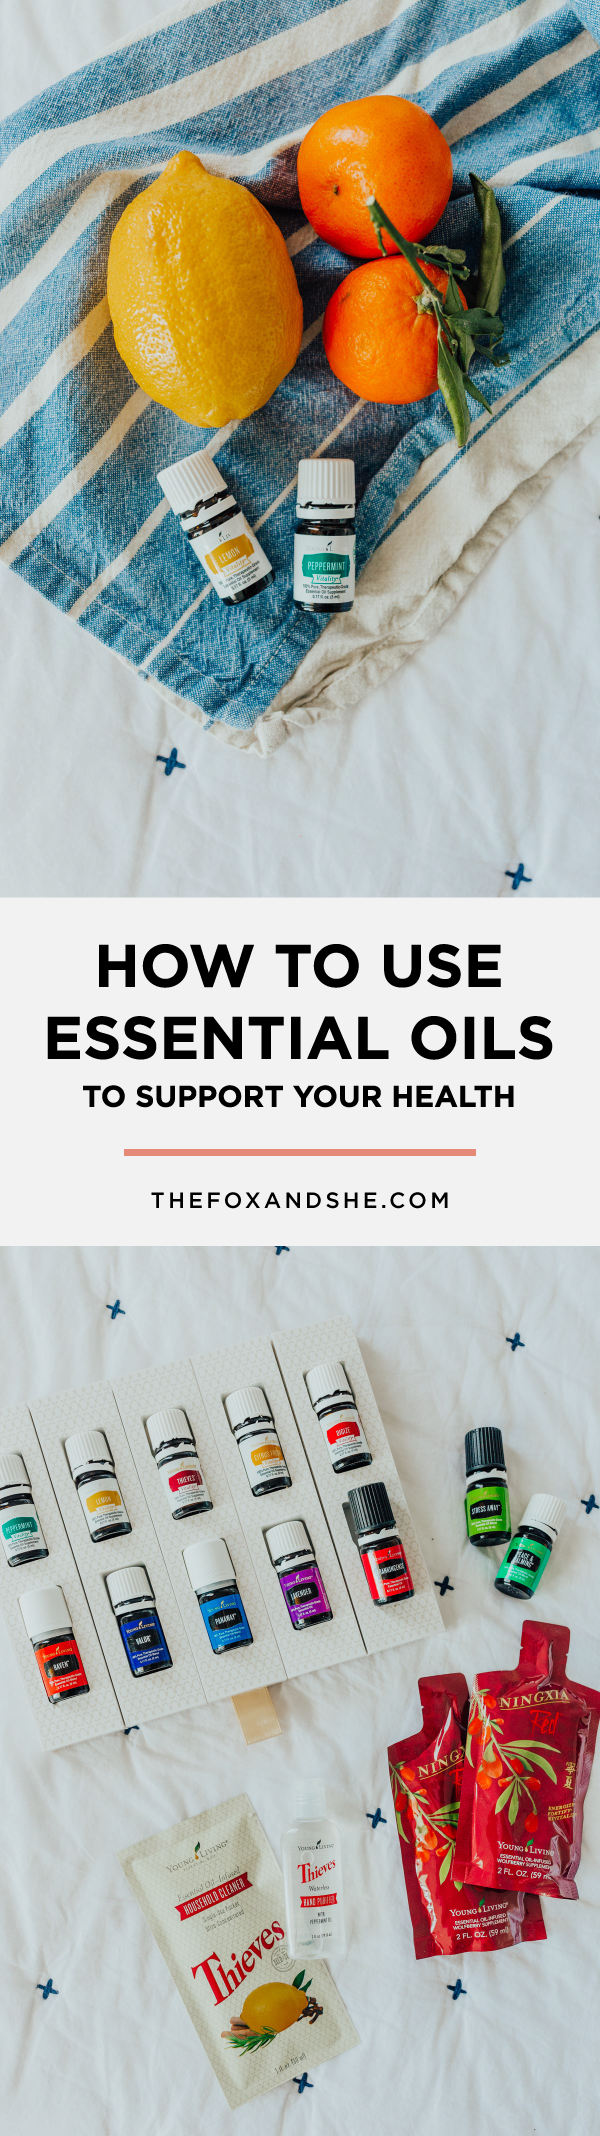 how to use essential oils in your home to support your health and overall wellness—young living essential oils for beginners